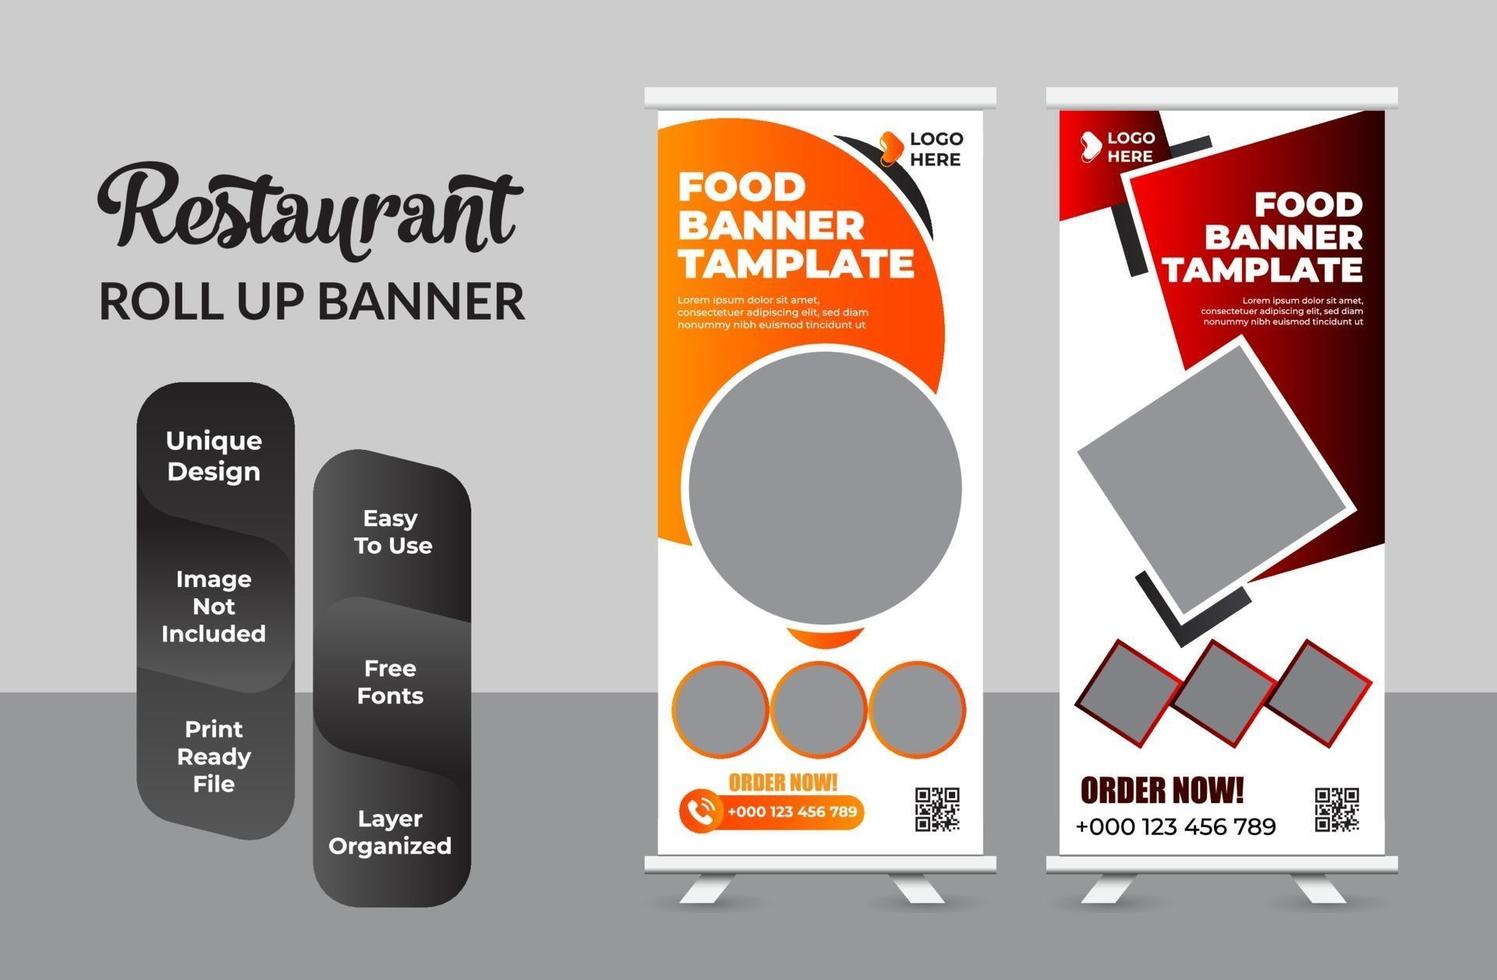 Food and Restaurant roll up banner design template set vector